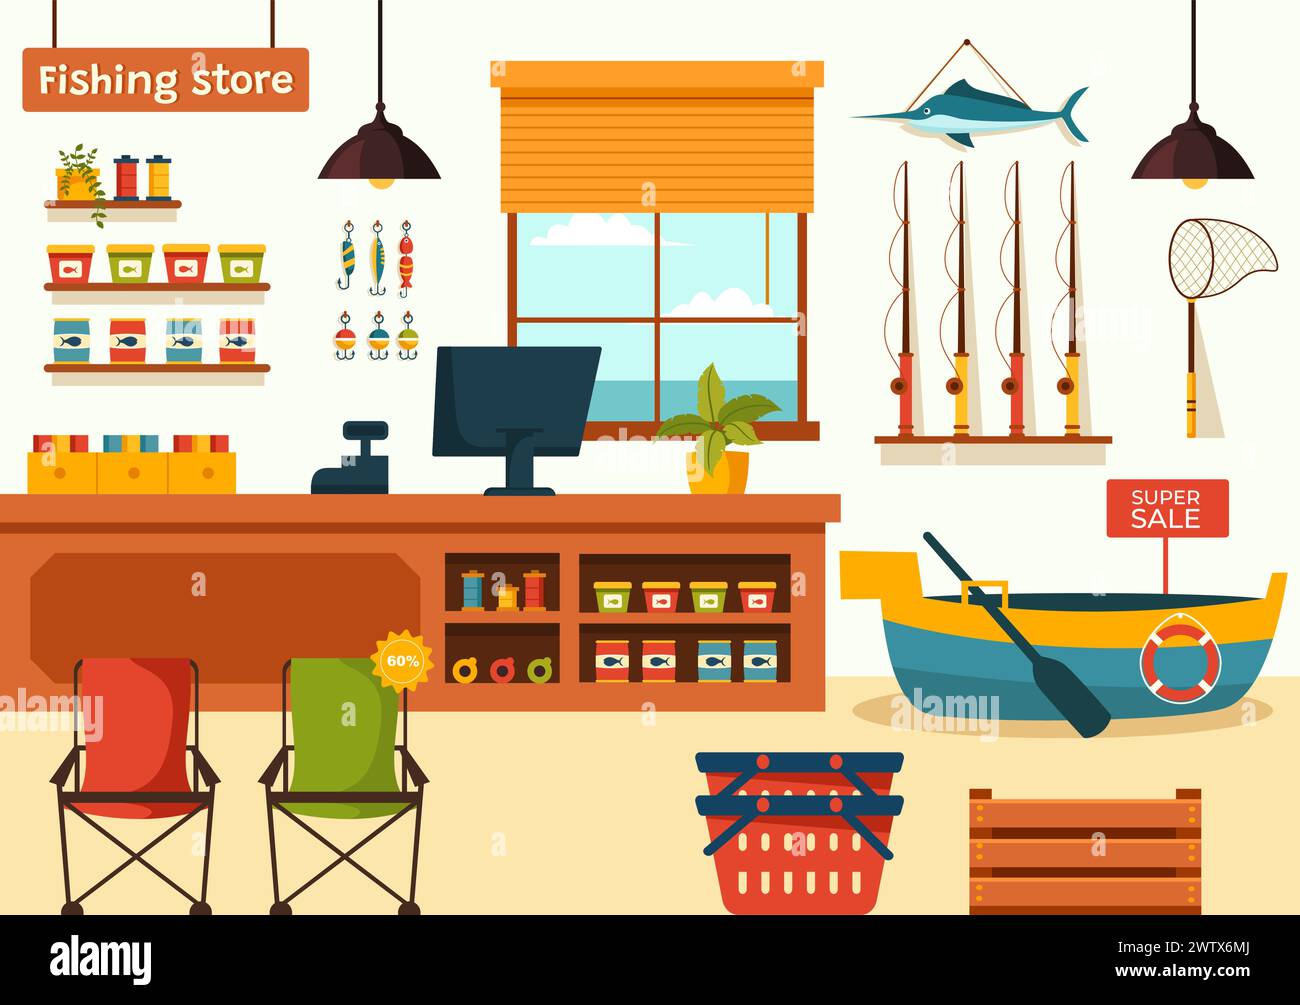 Fishing Store Vector Illustration with Selling Various Fishery Equipment, Bait, Fish Catching Accessories or Items on Flat Cartoon Background Stock Vector